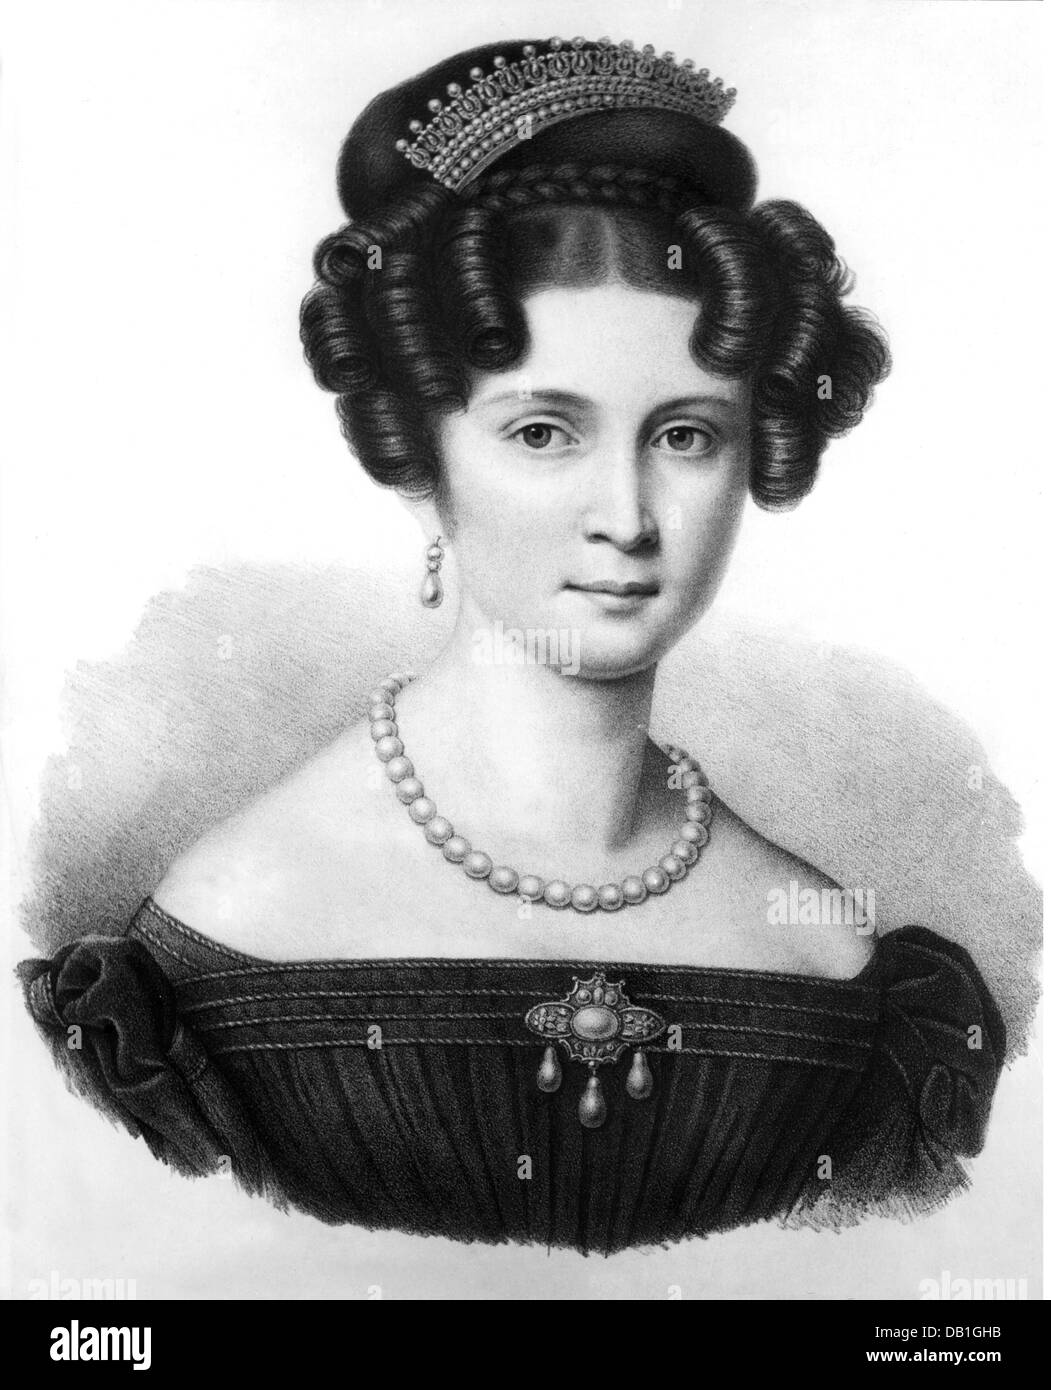 Therese Charlotte, 8.7.1792 - 26.10.1854, Queen of Bavaria 13.10.1825 - 20.3.1848, portrait, lithograph, circa 1820, Stock Photo